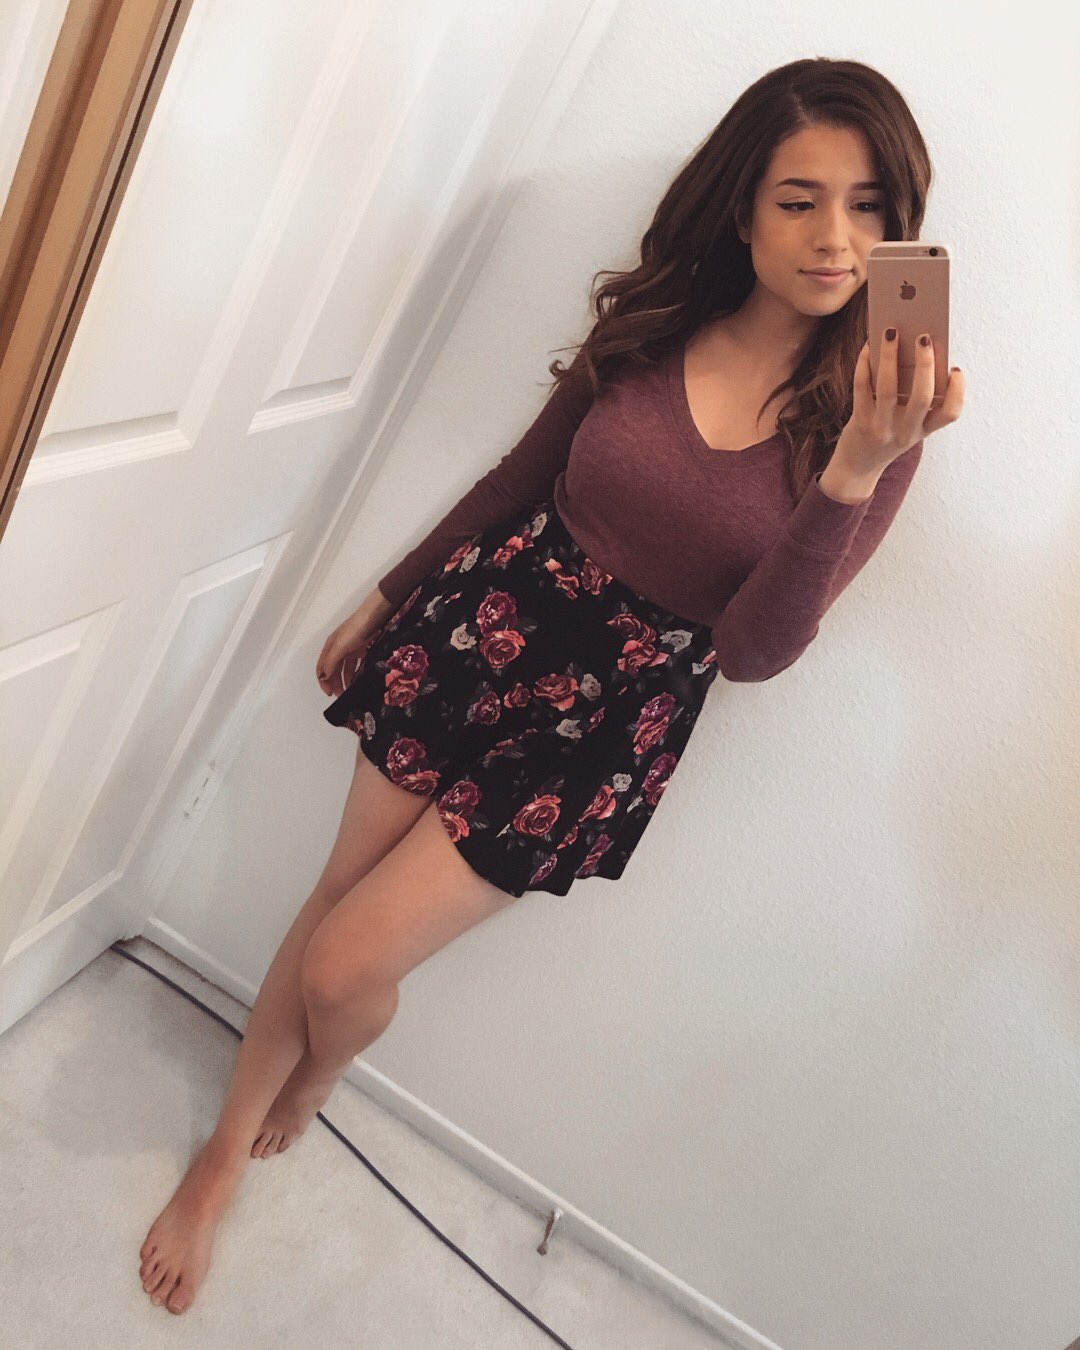 pokimane on Twitter: "I'm live :D giveaway winner for the Instax will